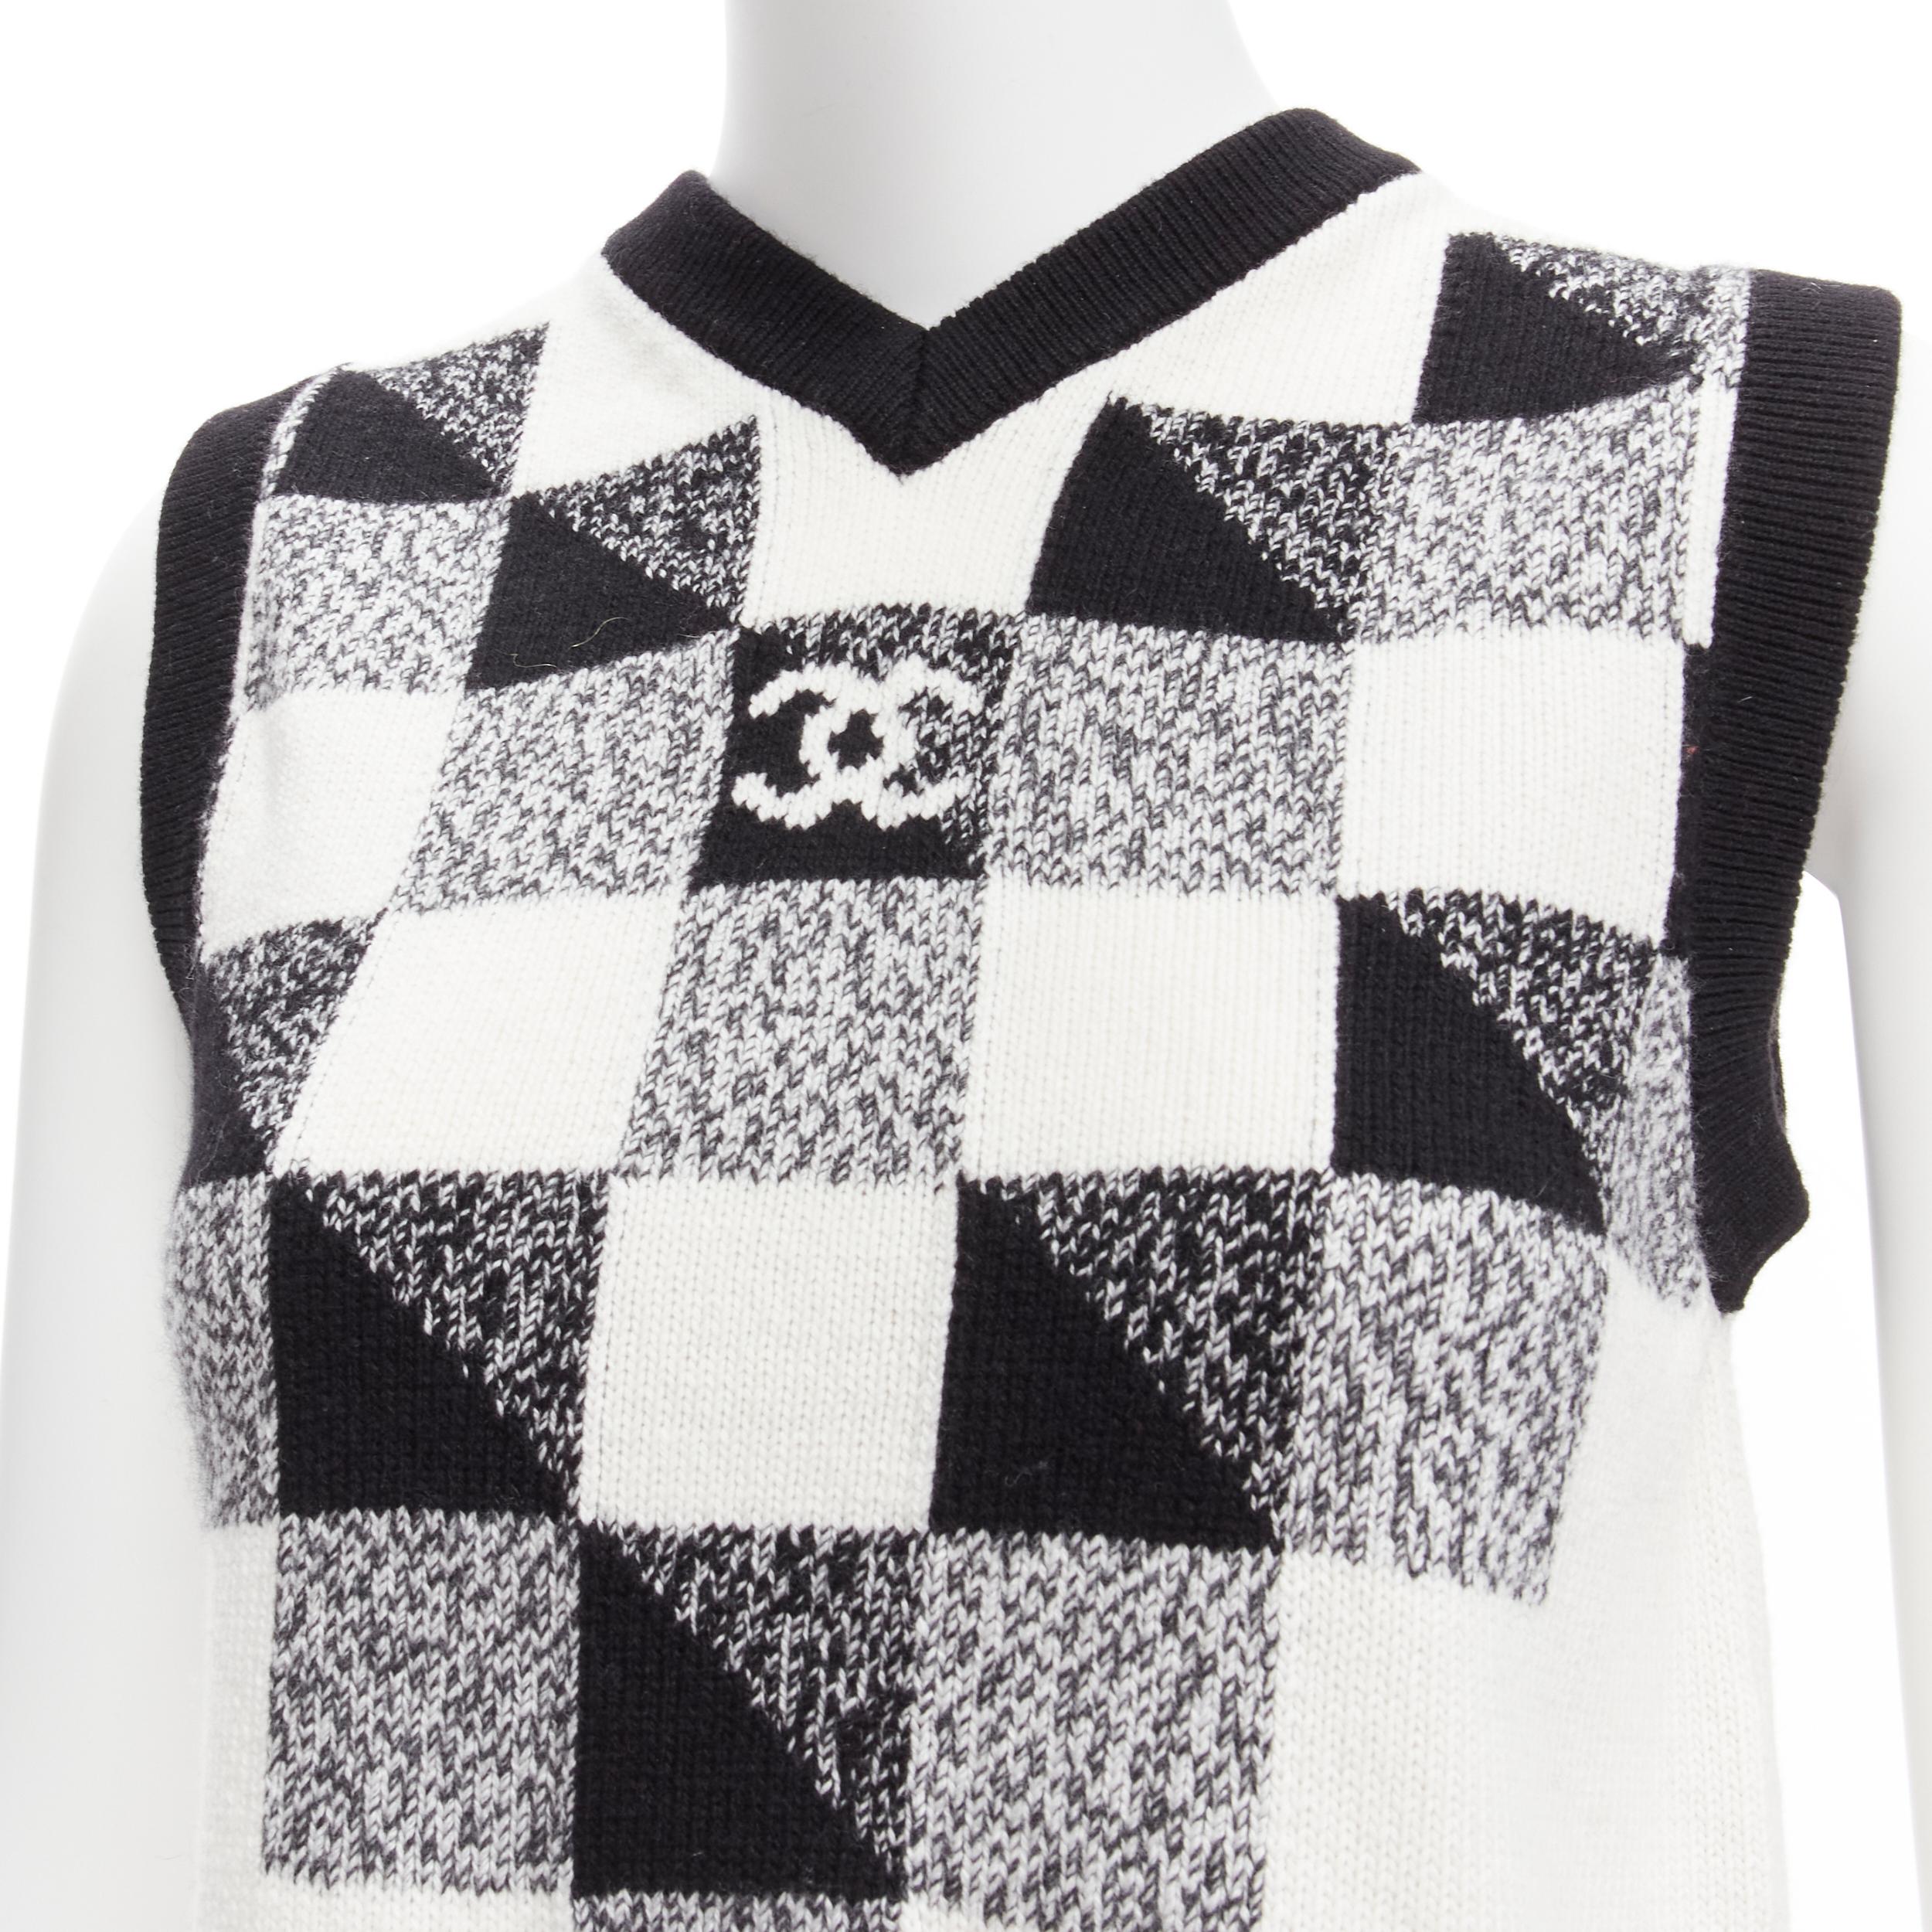 CHANEL 100% cashmere black white graphic check CC logo sweater vest FR36 S
Reference: AAWC/A00458
Brand: Chanel
Designer: Virginie Viard
Material: Cashmere
Color: Black, White
Pattern: Checkered
Closure: Pullover
Extra Details: CC Chanel button at